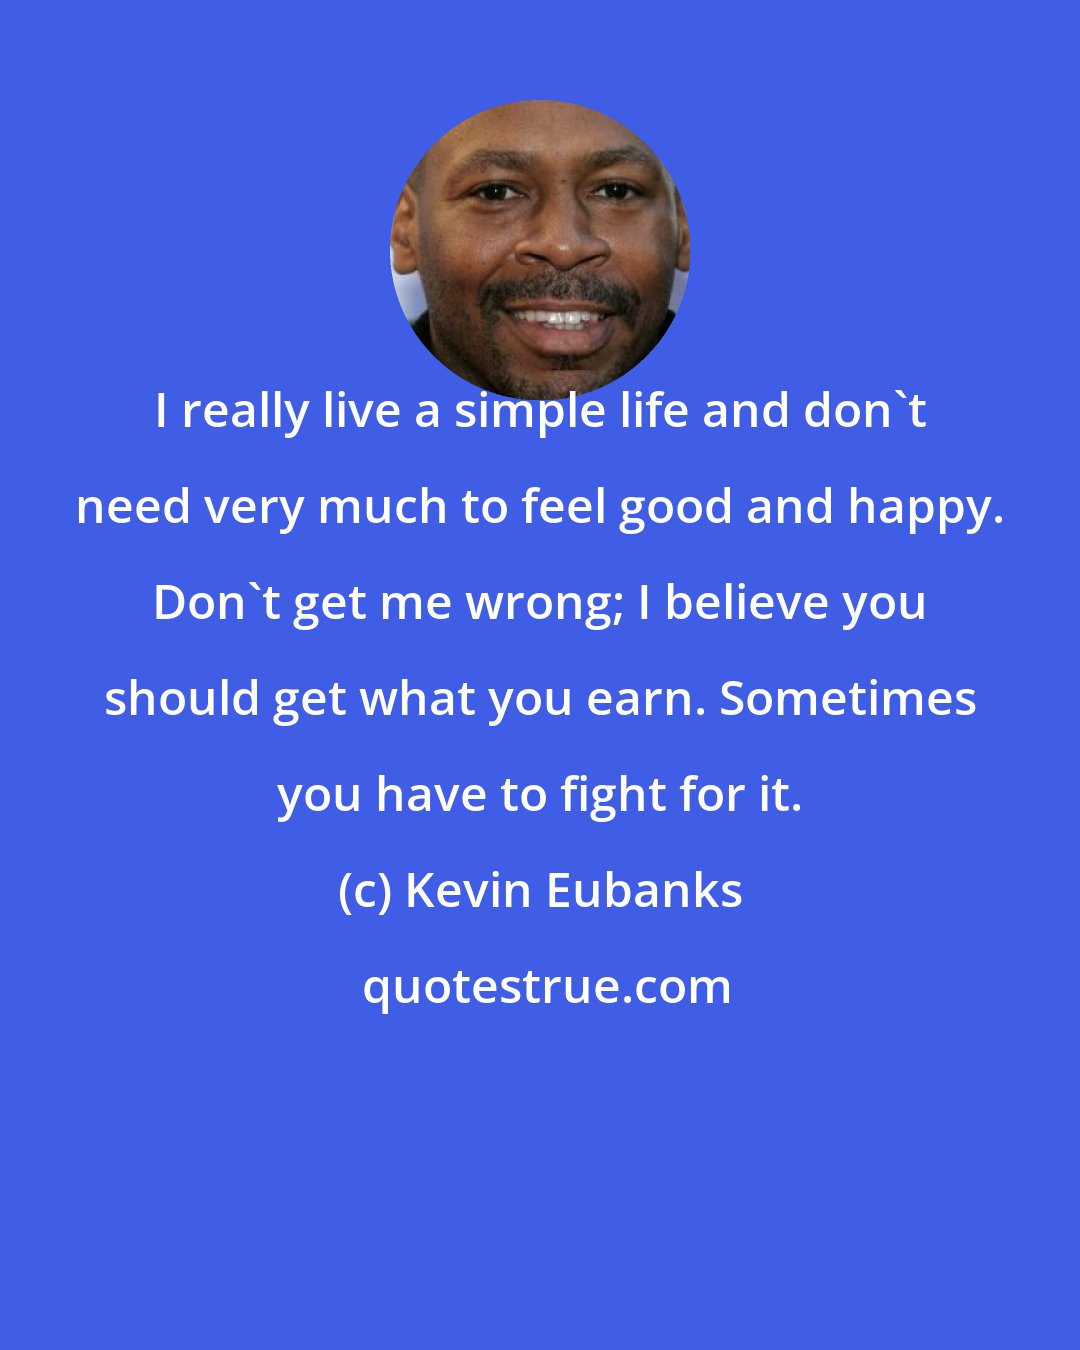 Kevin Eubanks: I really live a simple life and don't need very much to feel good and happy. Don't get me wrong; I believe you should get what you earn. Sometimes you have to fight for it.